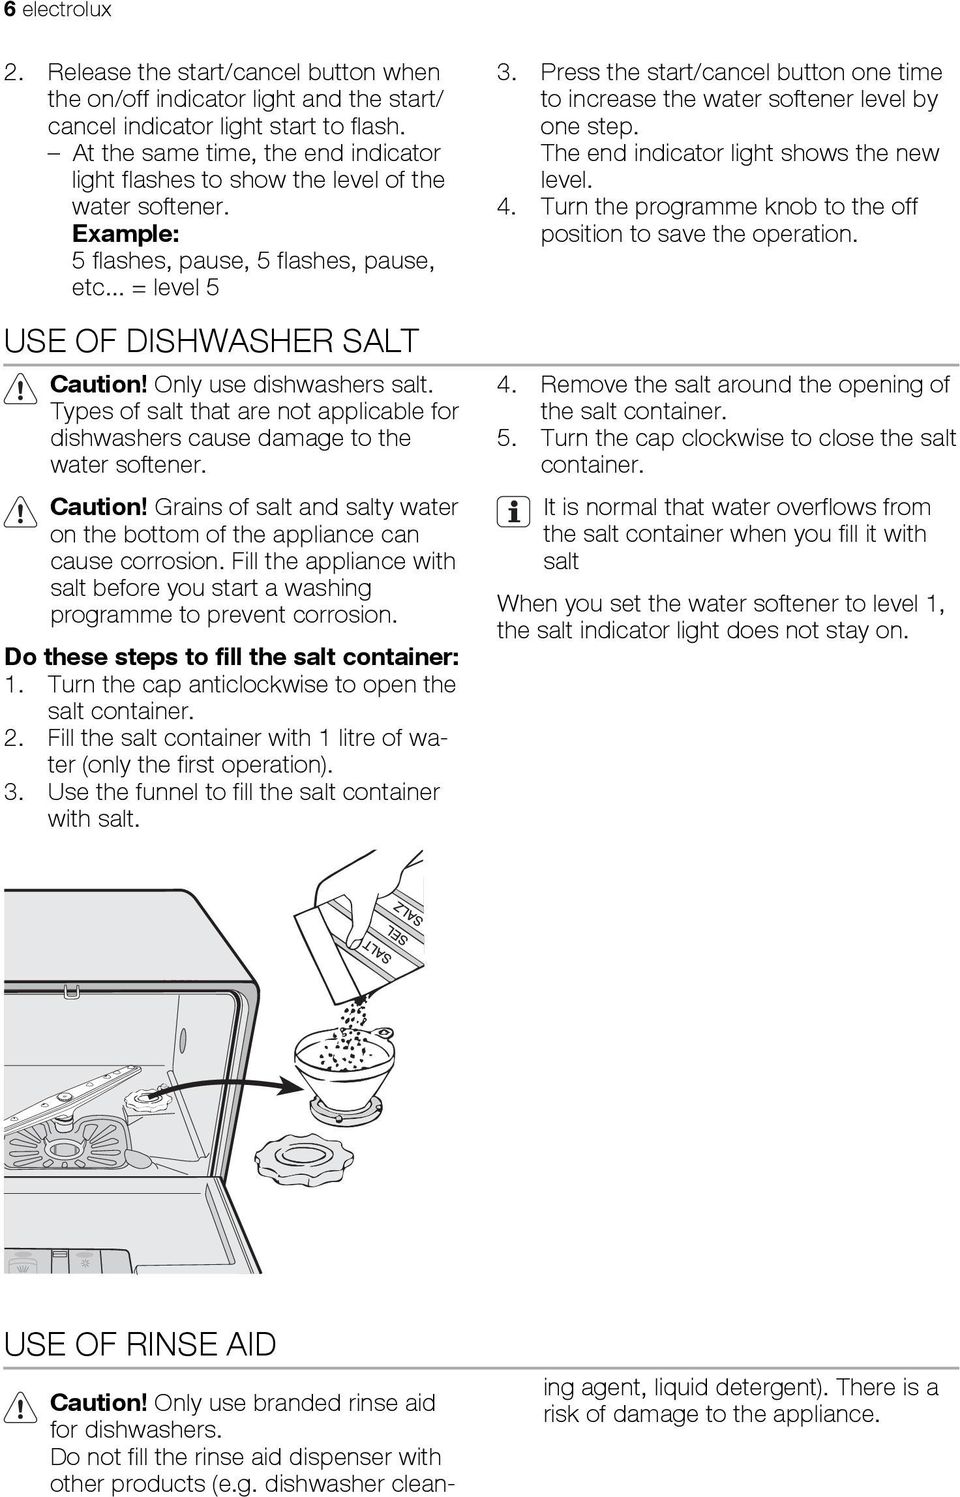 Only use dishwashers salt. Types of salt that are not applicable for dishwashers cause damage to the water softener. Caution!